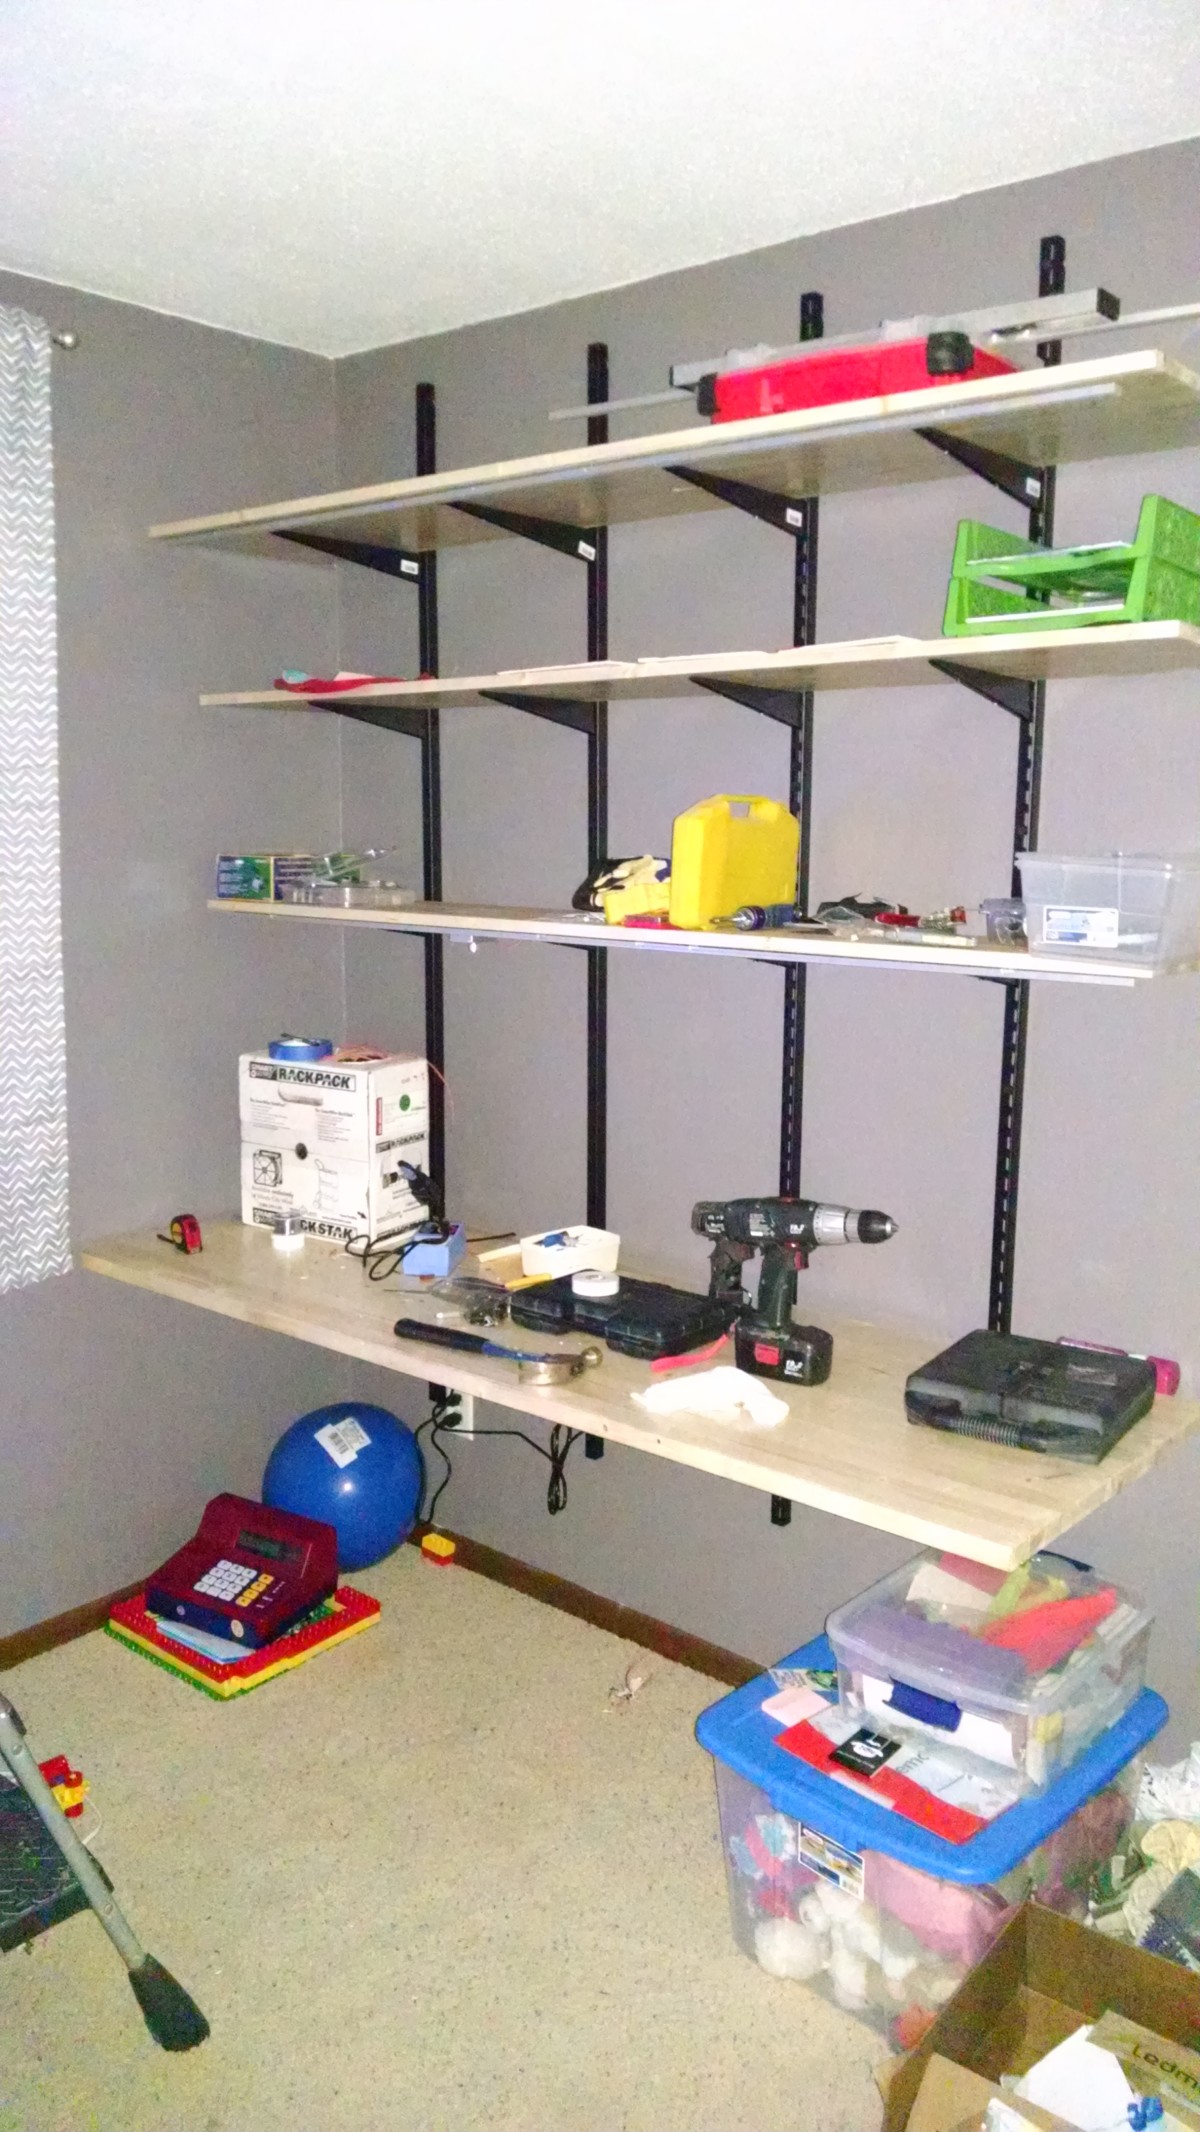 Pic of kids shelf bracket desk with LED strips in aluminum extrusions - lights off but flash makes look fake